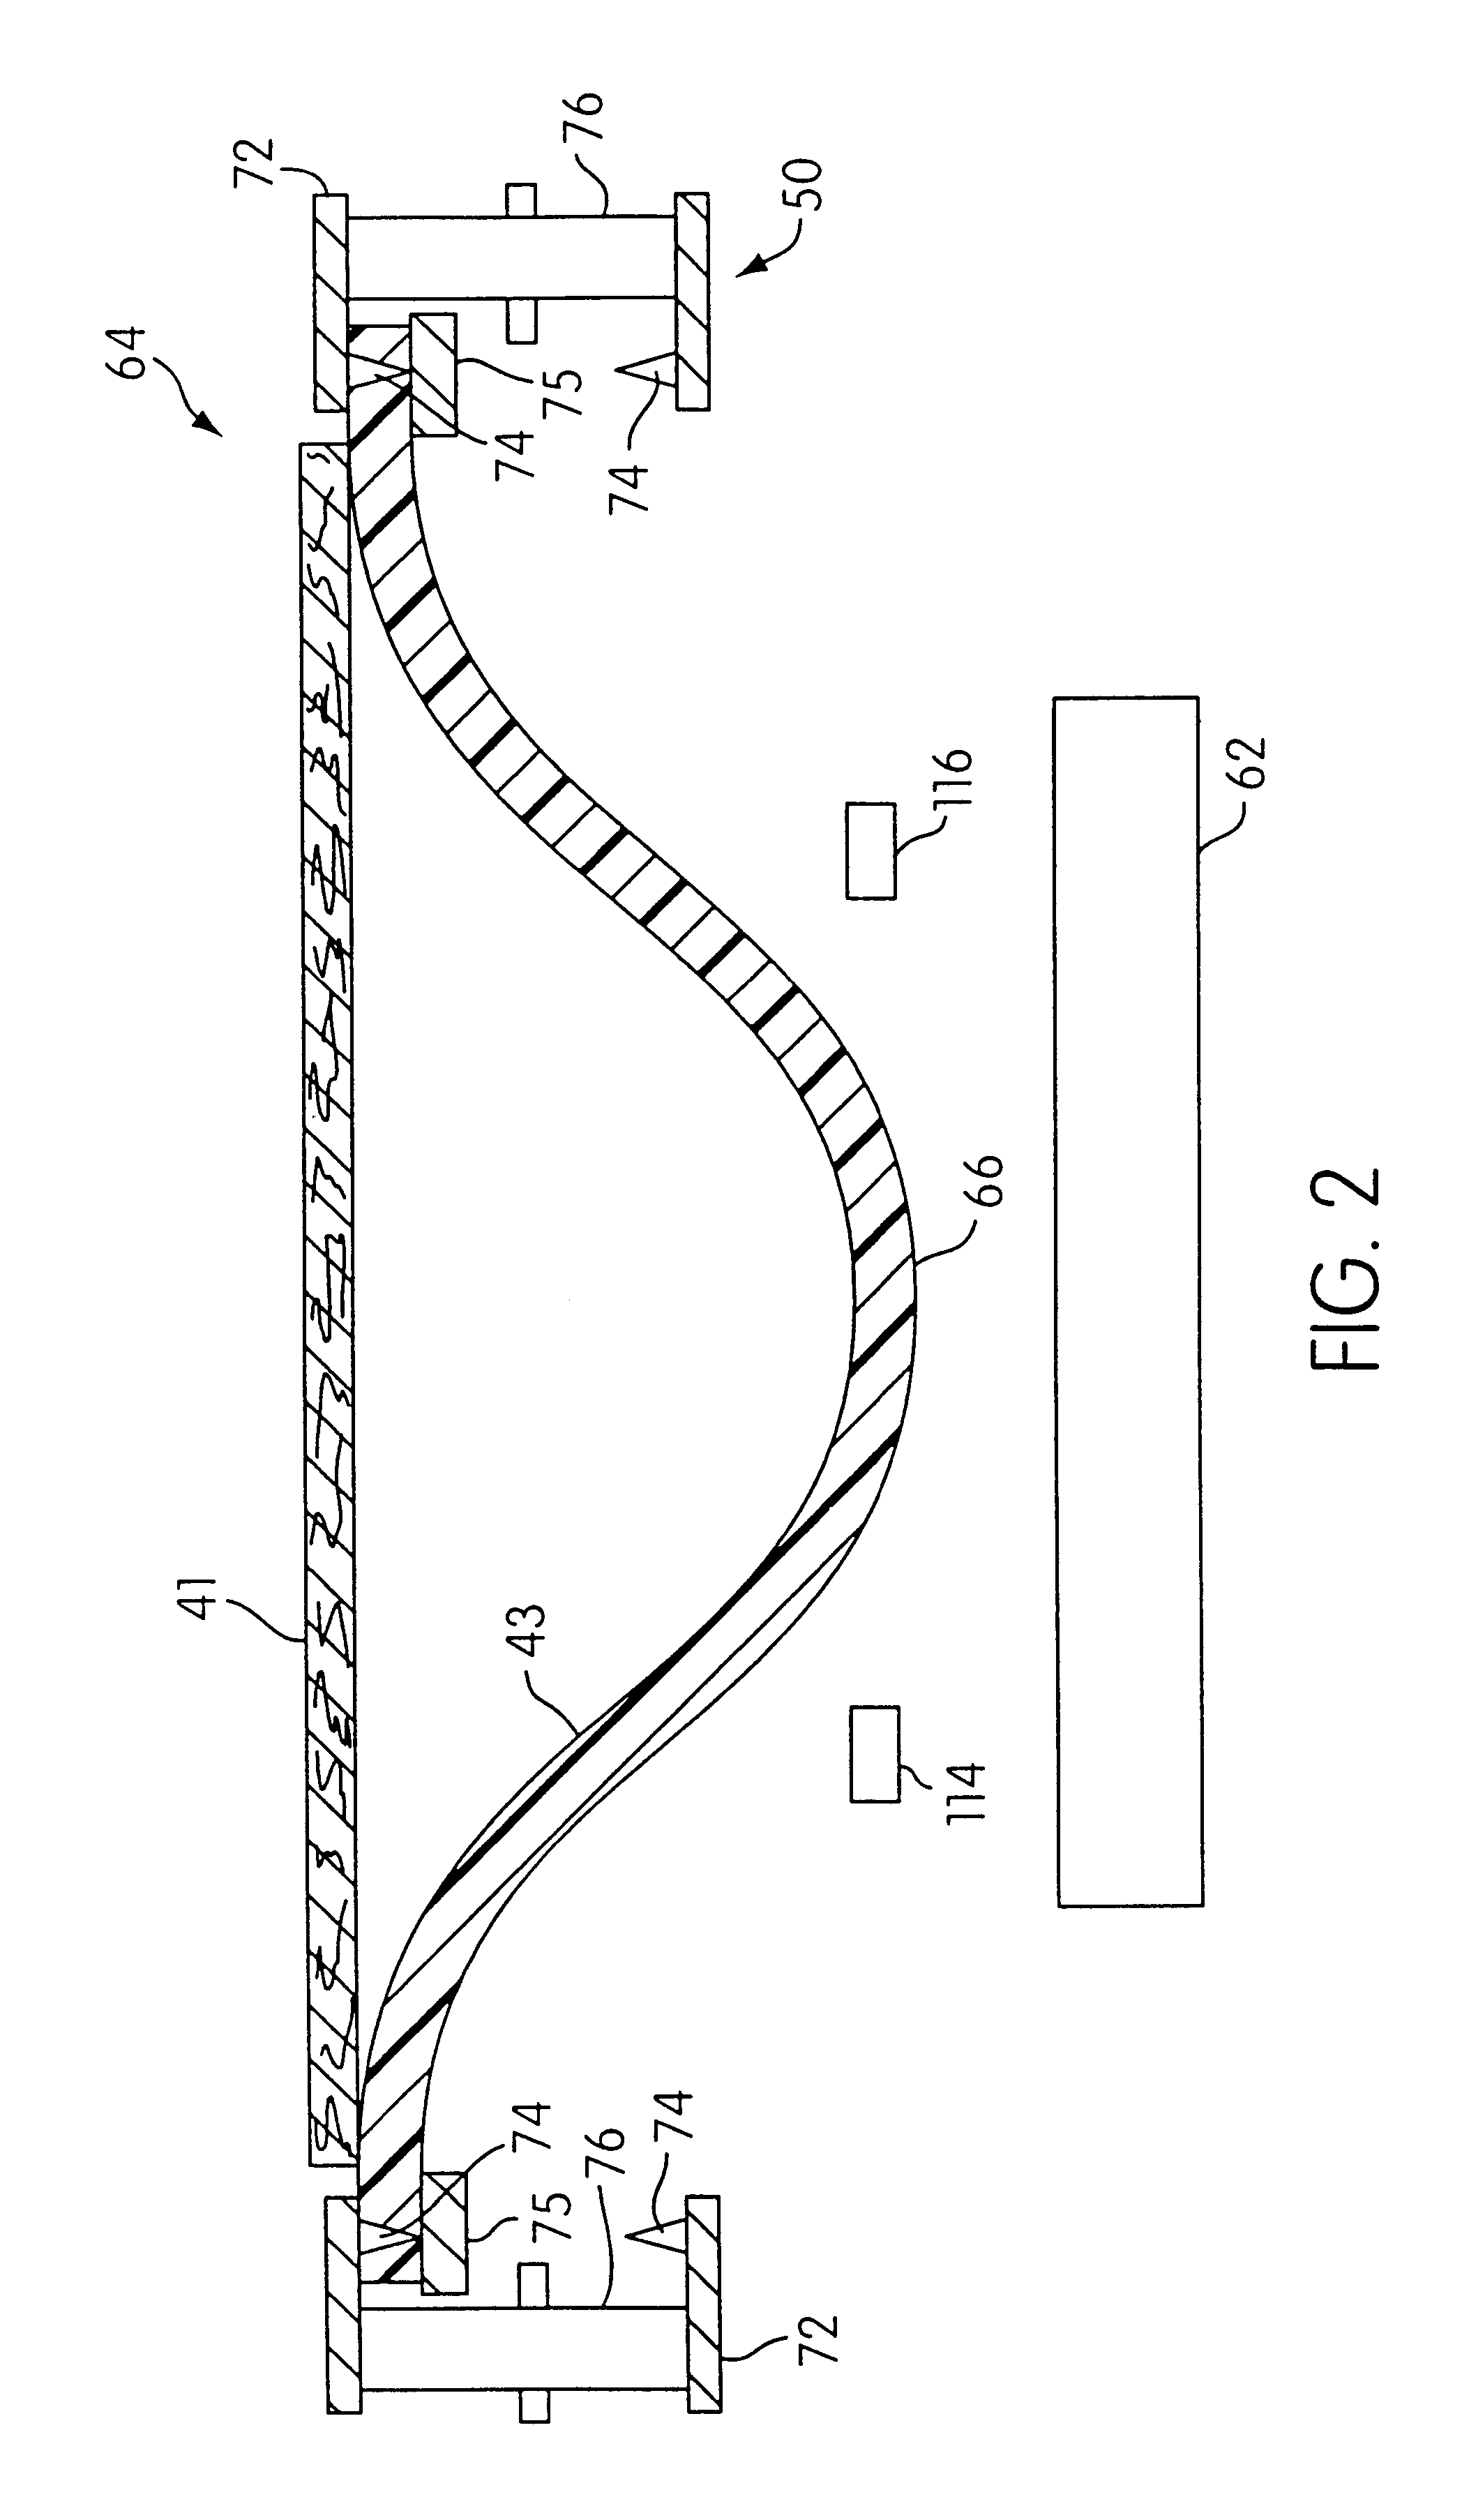 Apparatus and method for forming an interior panel for a vehicle